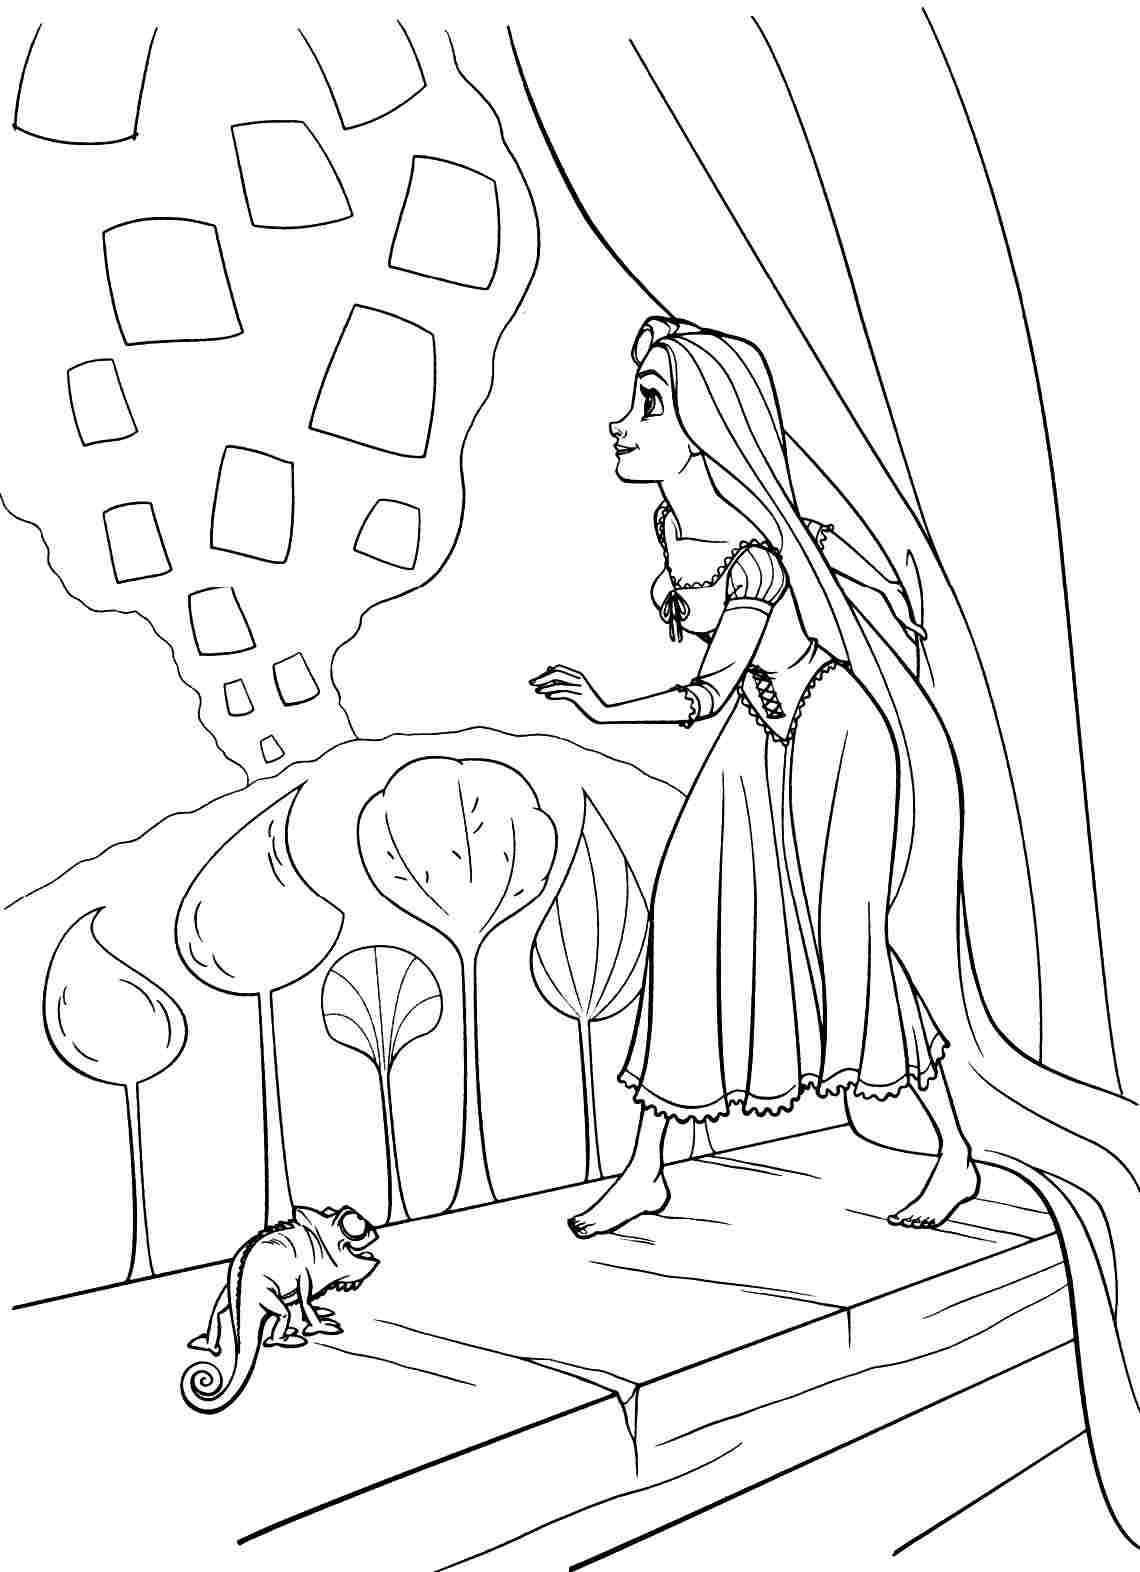 rapunzel-coloring-pages-best-coloring-pages-for-kids